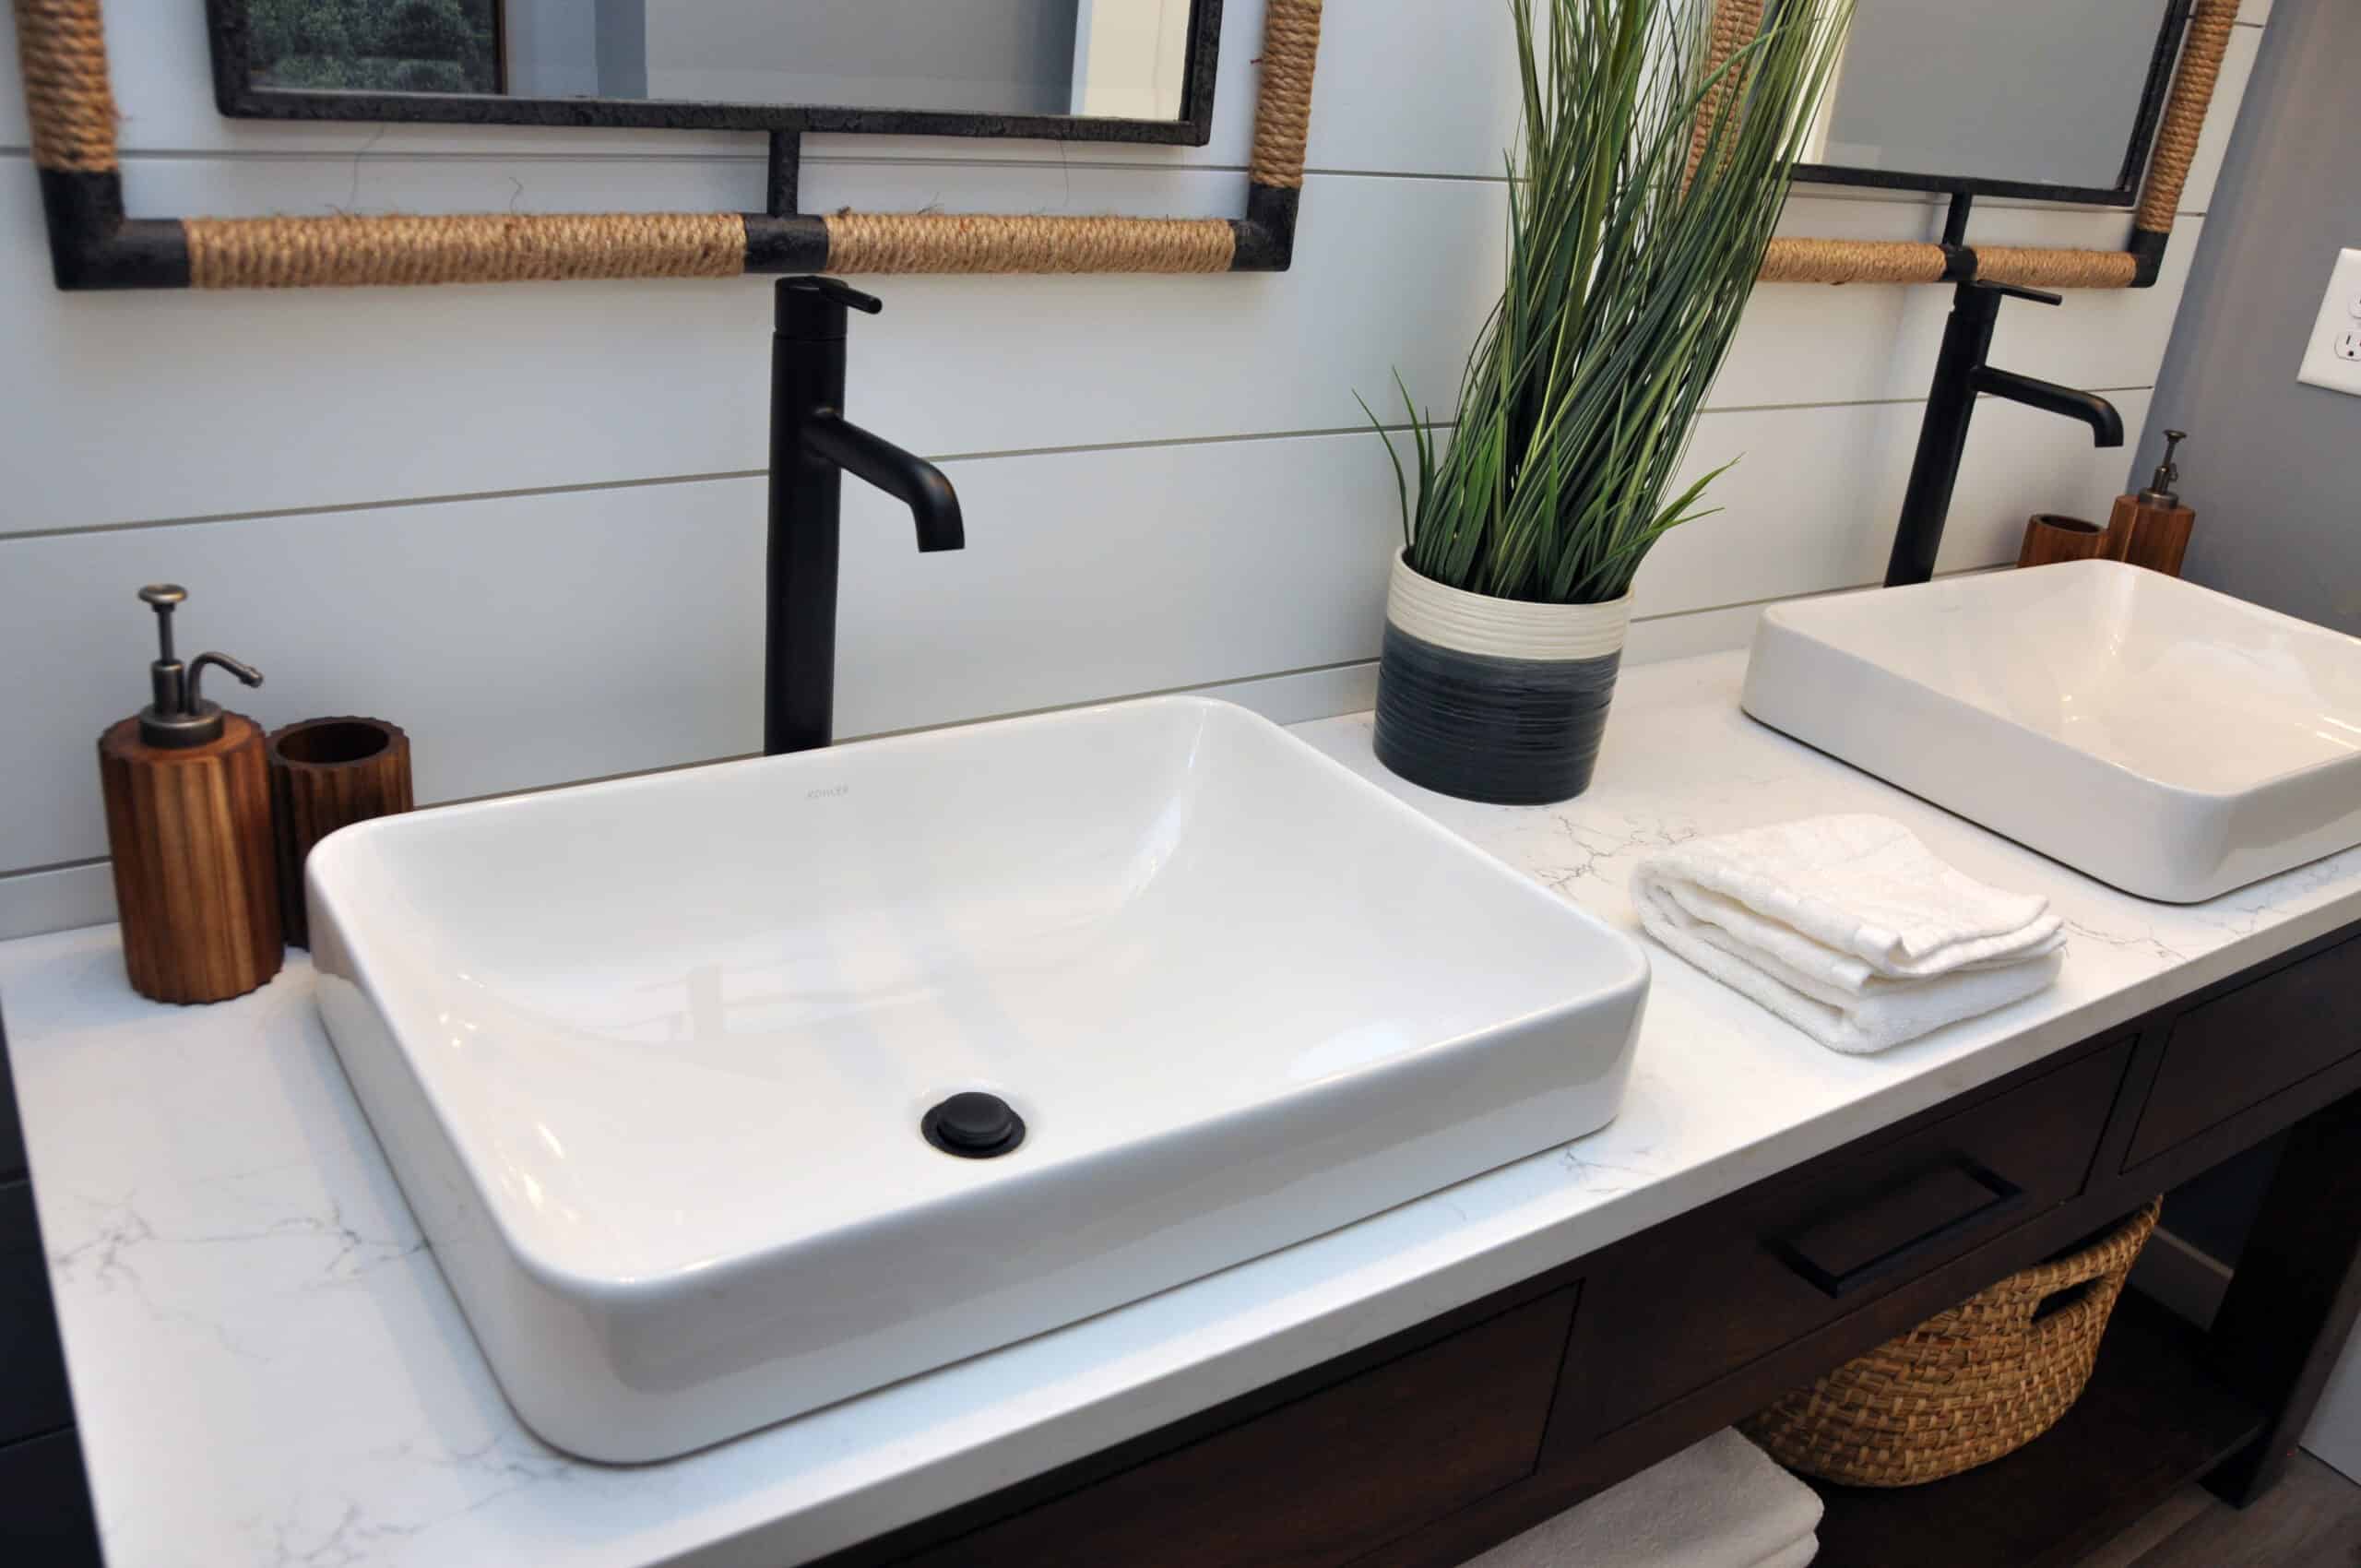 Two sinks side by side with black and white theme